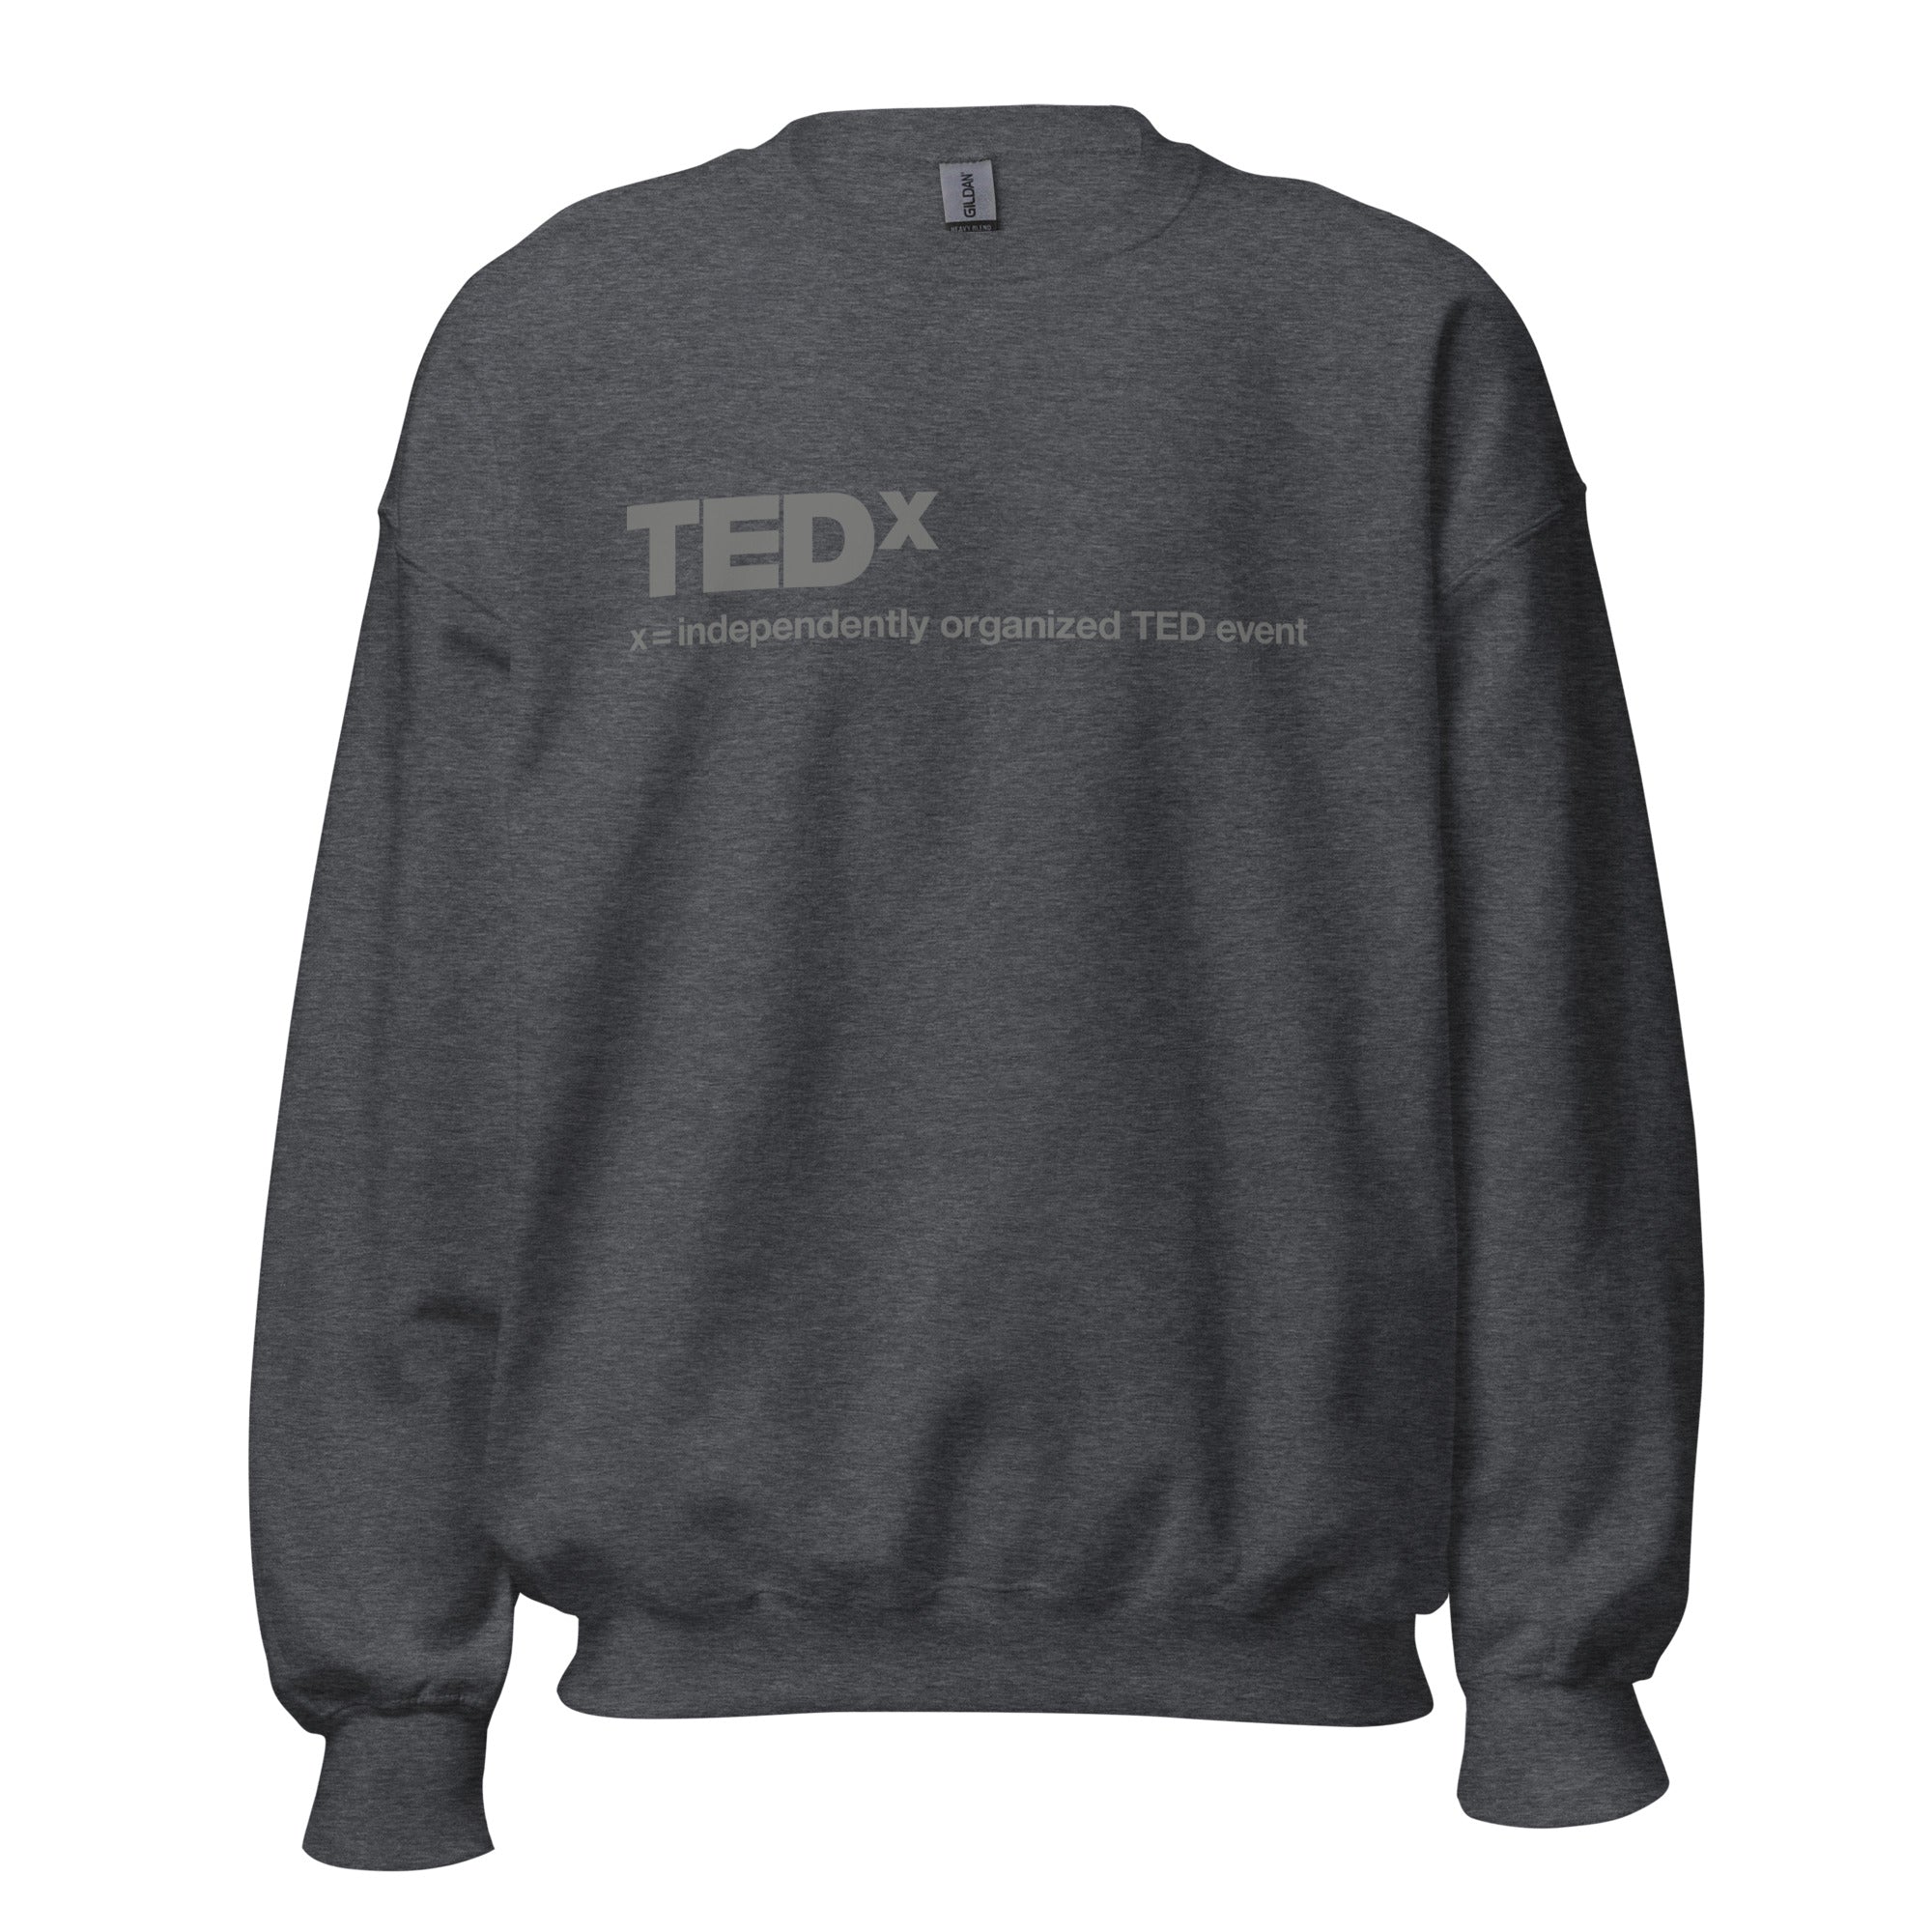 Unisex Crew Neck Sweatshirt - TEDx X = Independently Organized TED Event - GRAPHIC T-SHIRTS